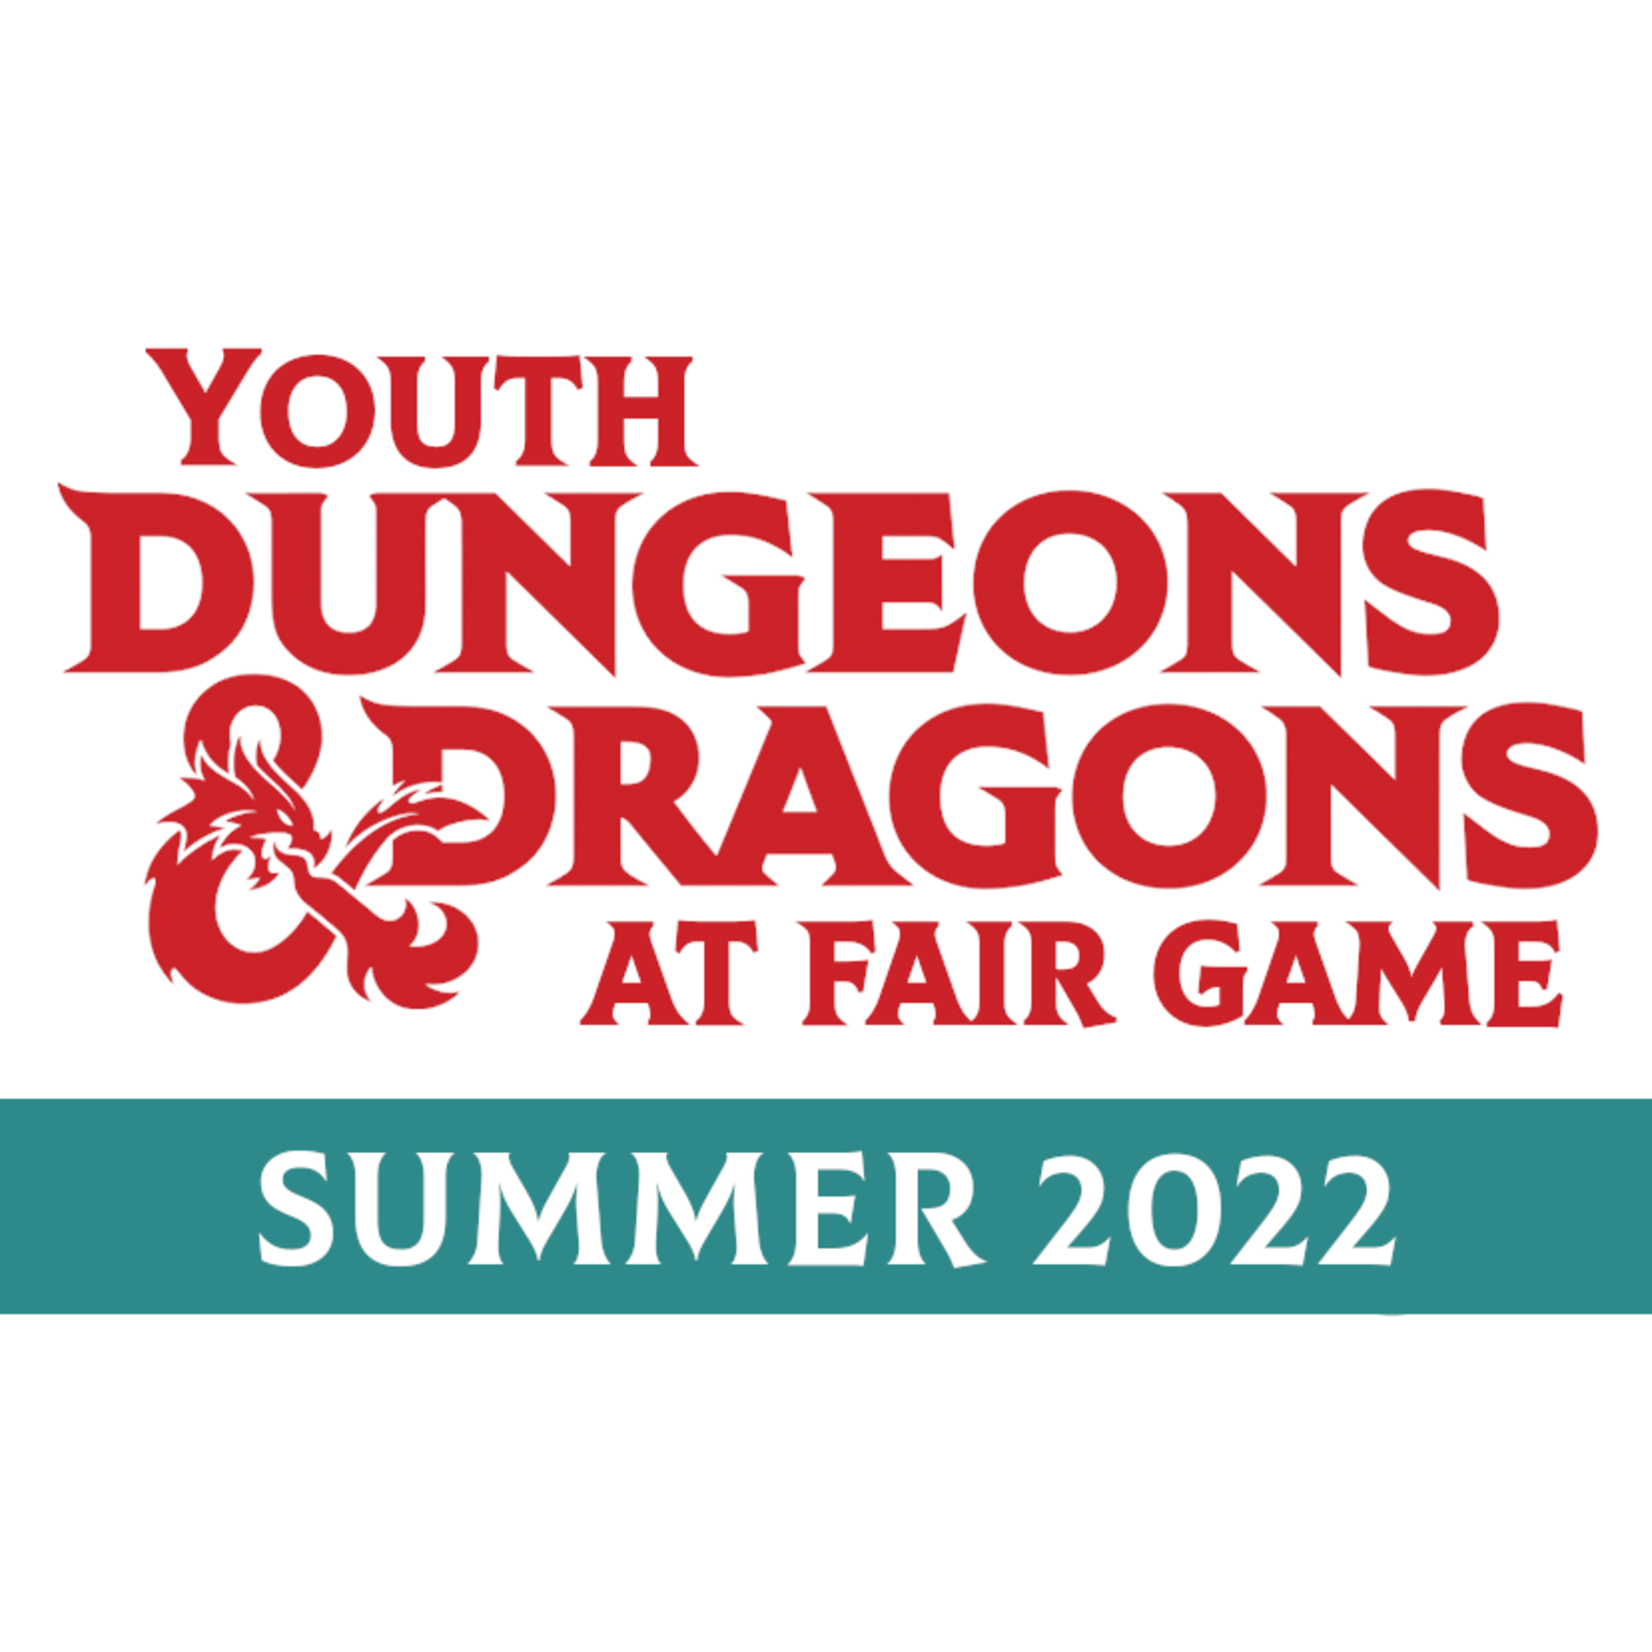 Fair Game YDND Summer 2022: Group DA1 - Downers Grove Wednesdays 1:30-3:30 PM (Ages 8-13)